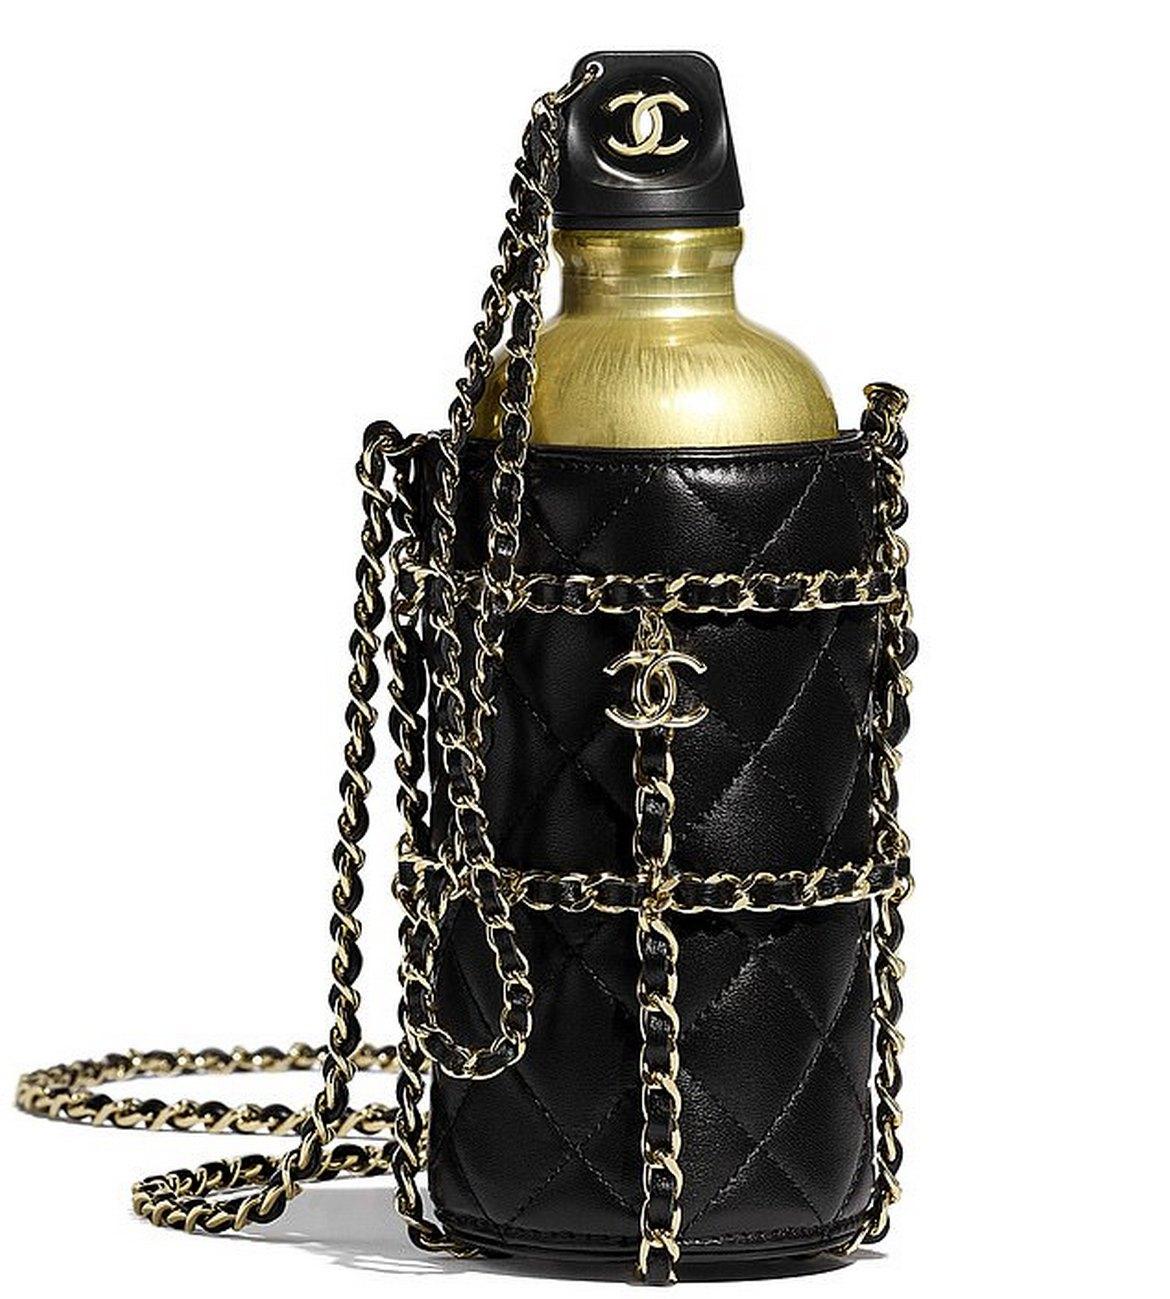 Care for a gold-colored Chanel water bottle with a flask bag for $5800